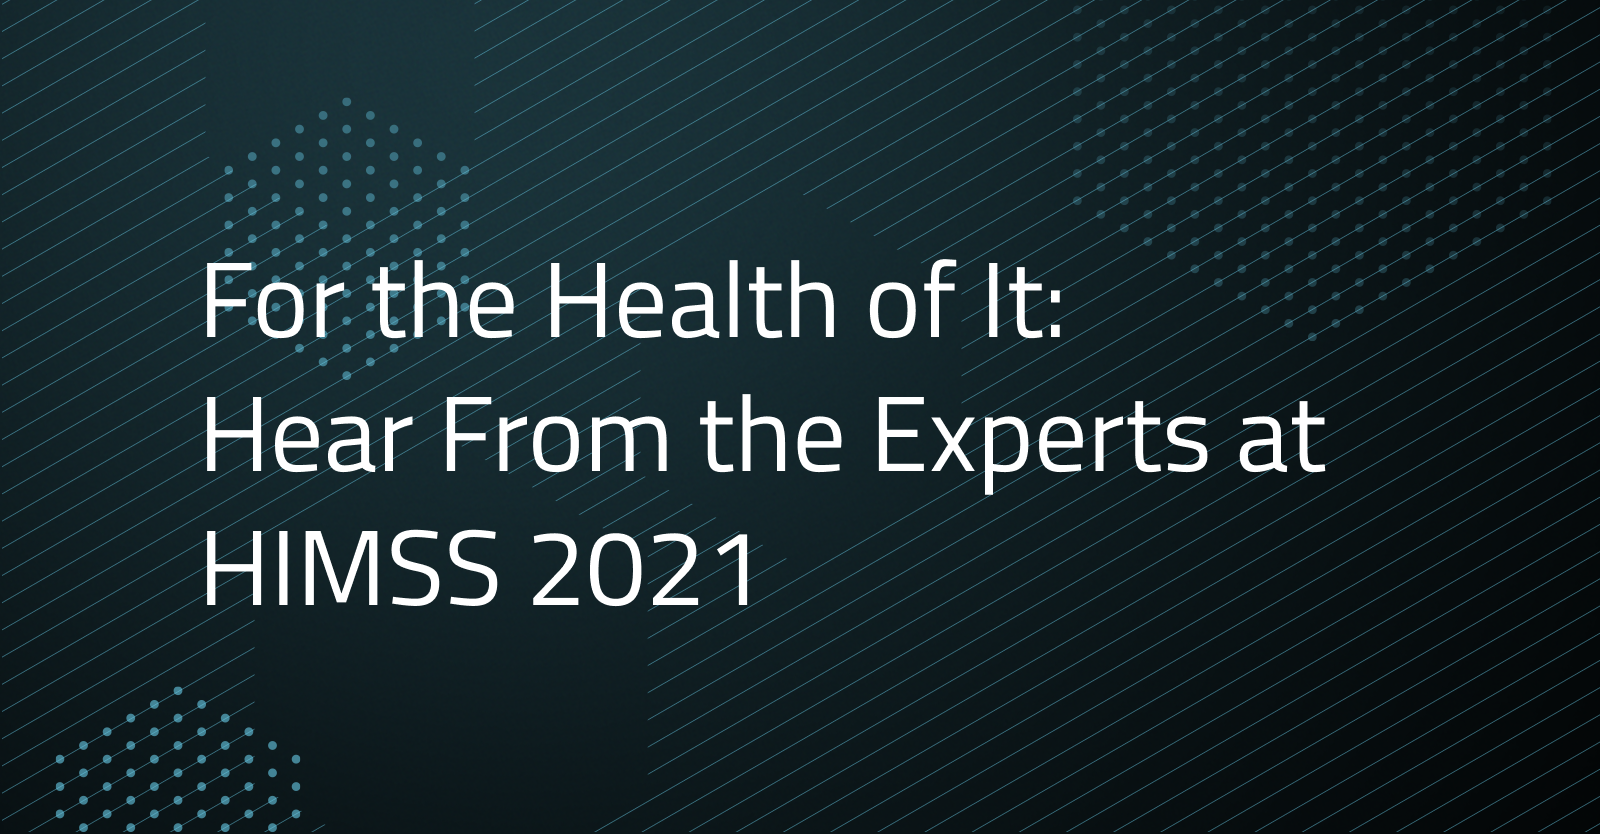 For the Health of It Hear From the Experts at HIMSS 2021